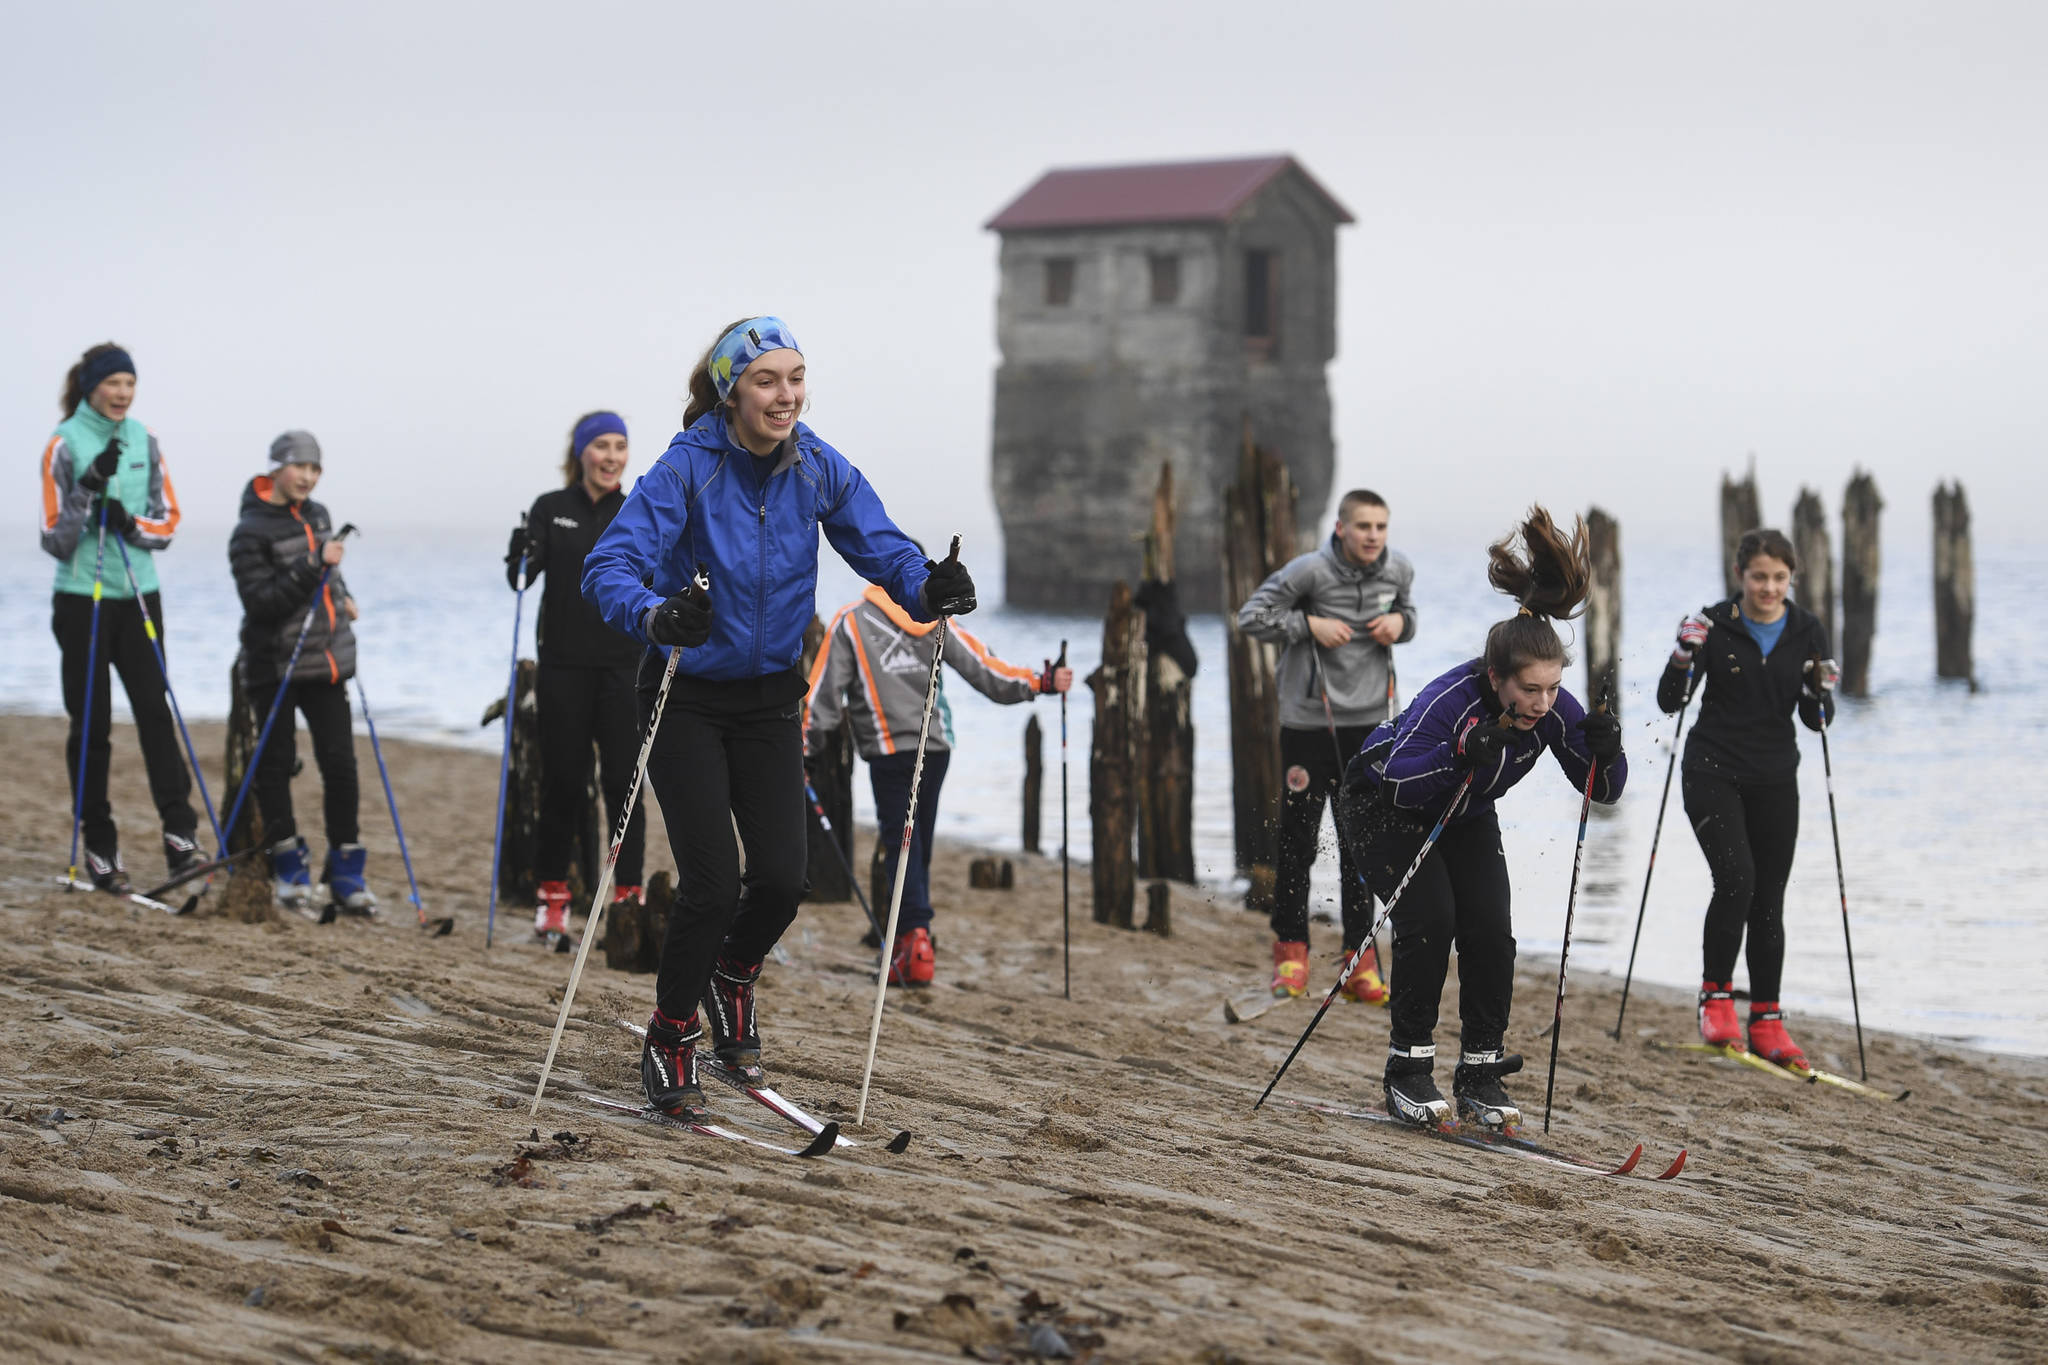 Anna Iverson, left, and Eva Goerin of the Juneau Nordic Ski Team race during practice at Sandy Beach on Friday, Nov. 8, 2019. The team, made up of middle and high school students, is finding alternative ways of training without snow as they prepare for their upcoming season. (Michael Penn | Juneau Empire)